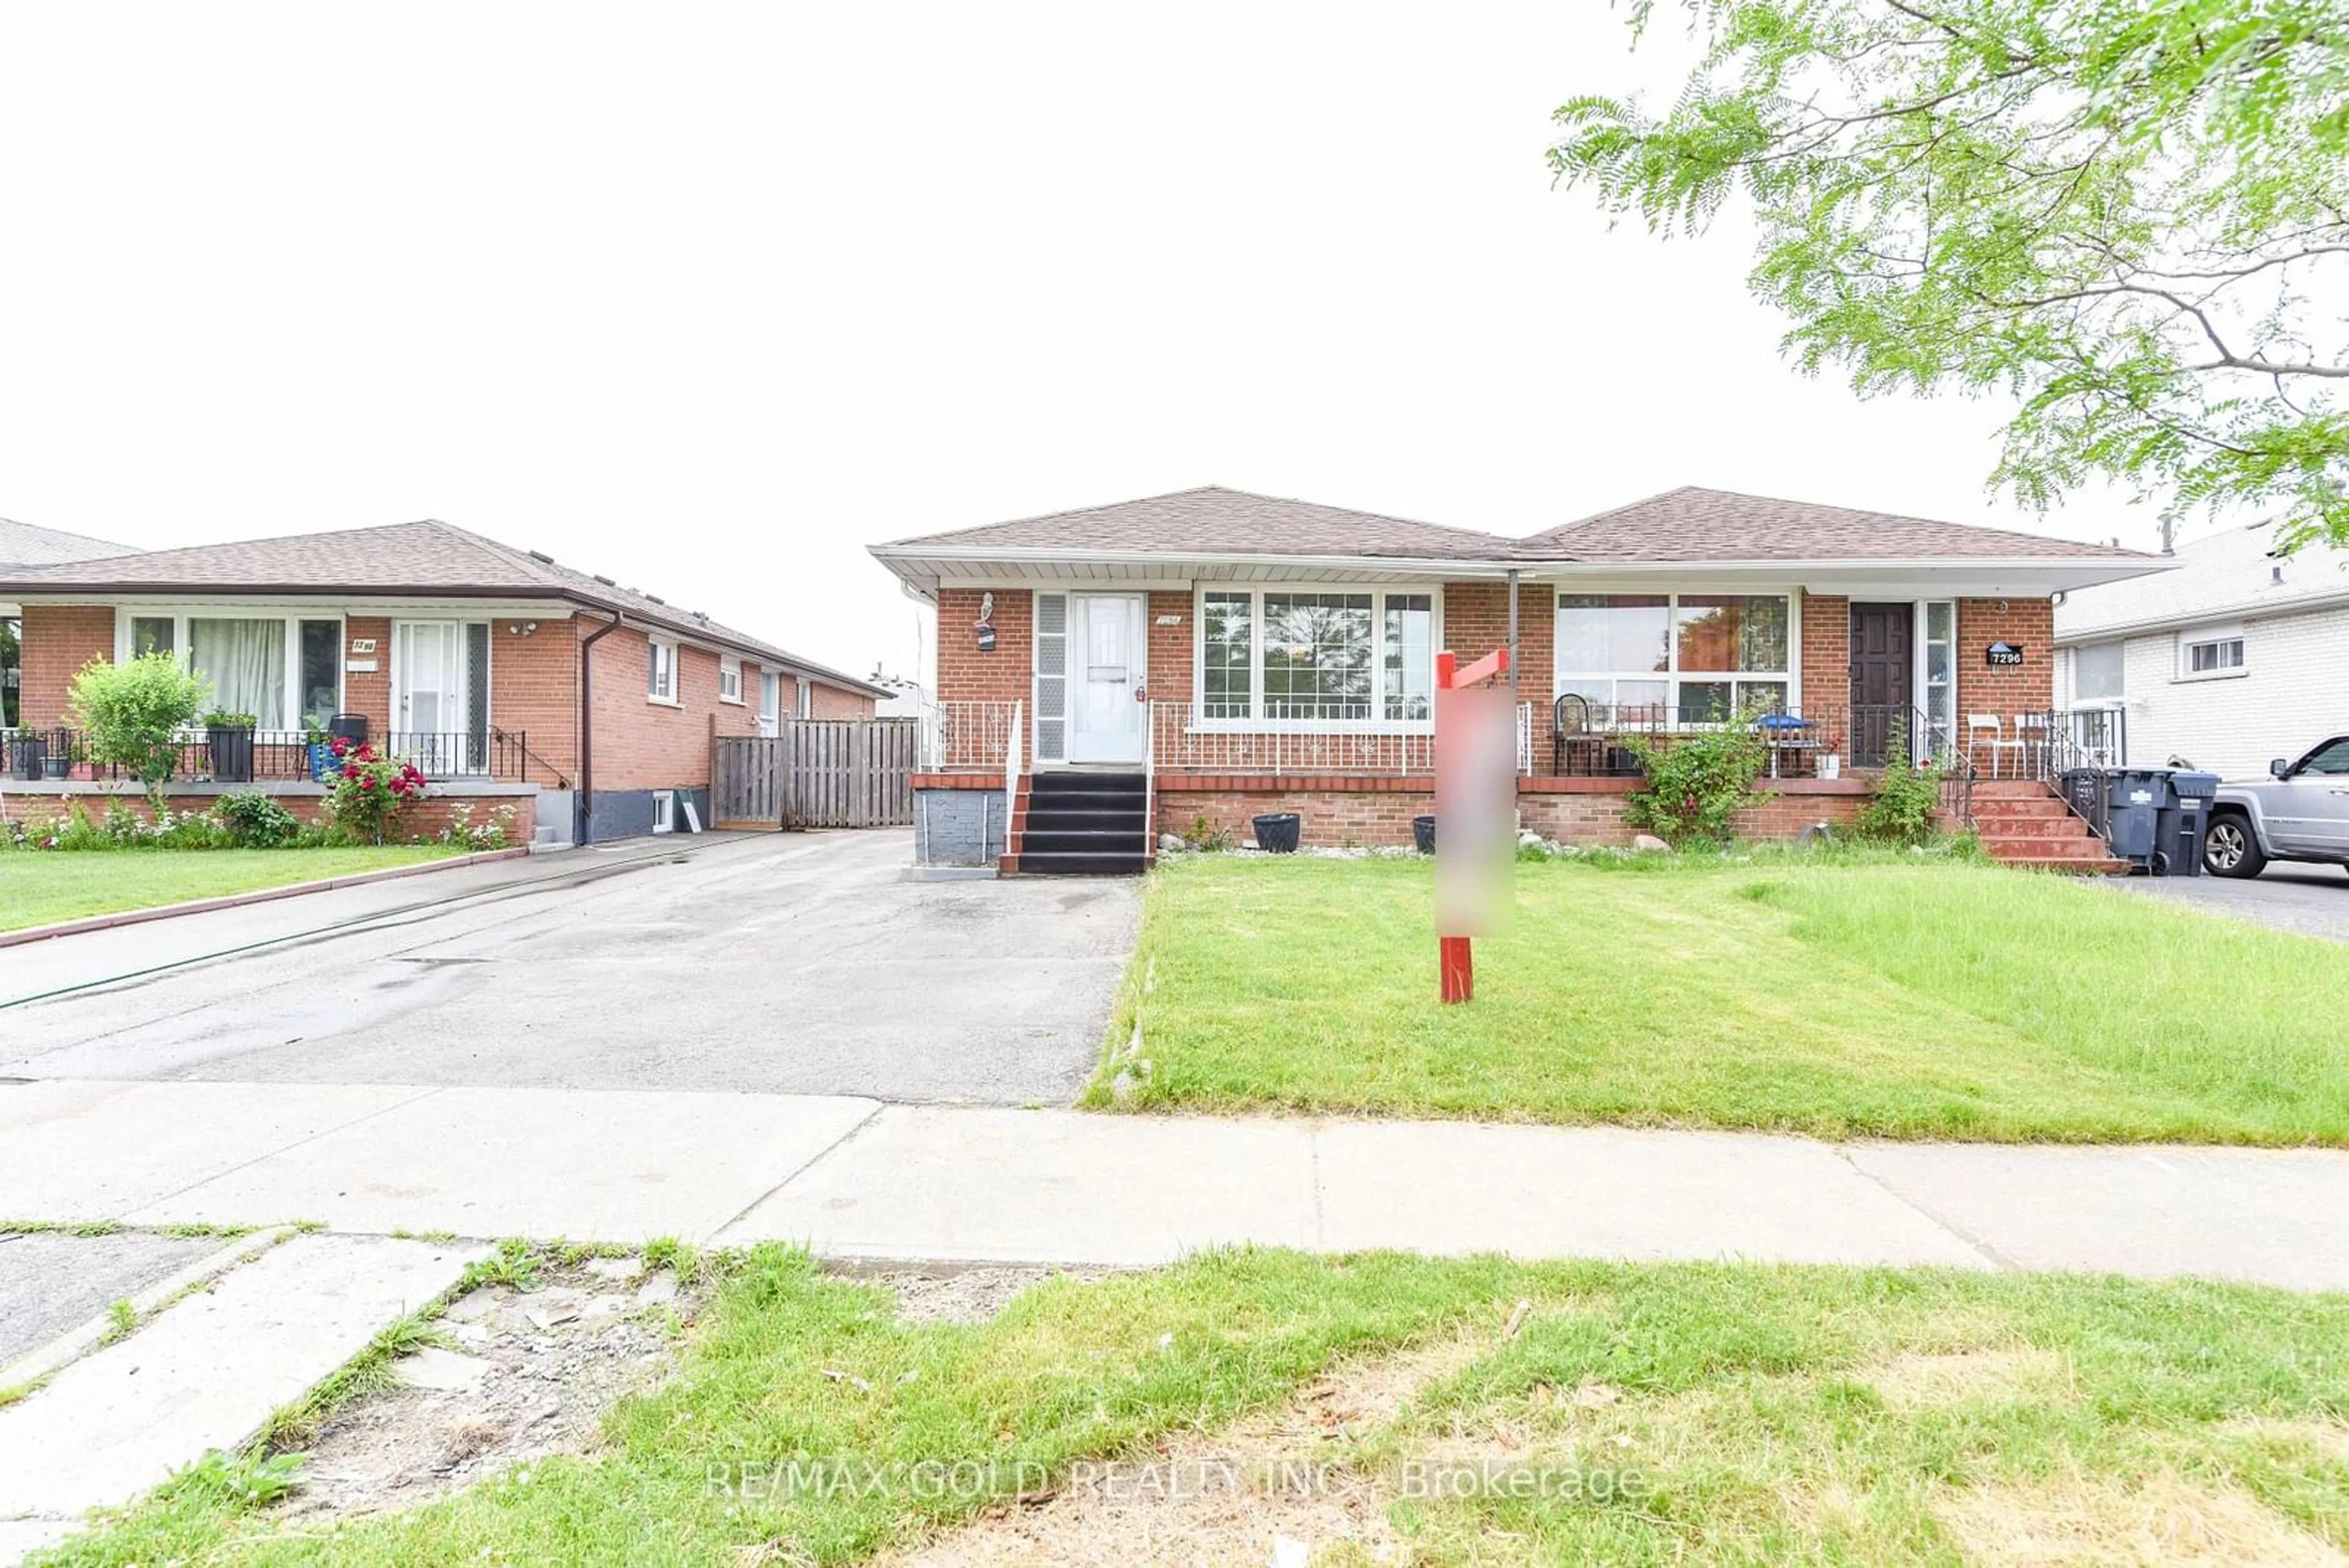 Home with brick exterior material for 7294 Vernor Dr, Mississauga Ontario L4T 2P4